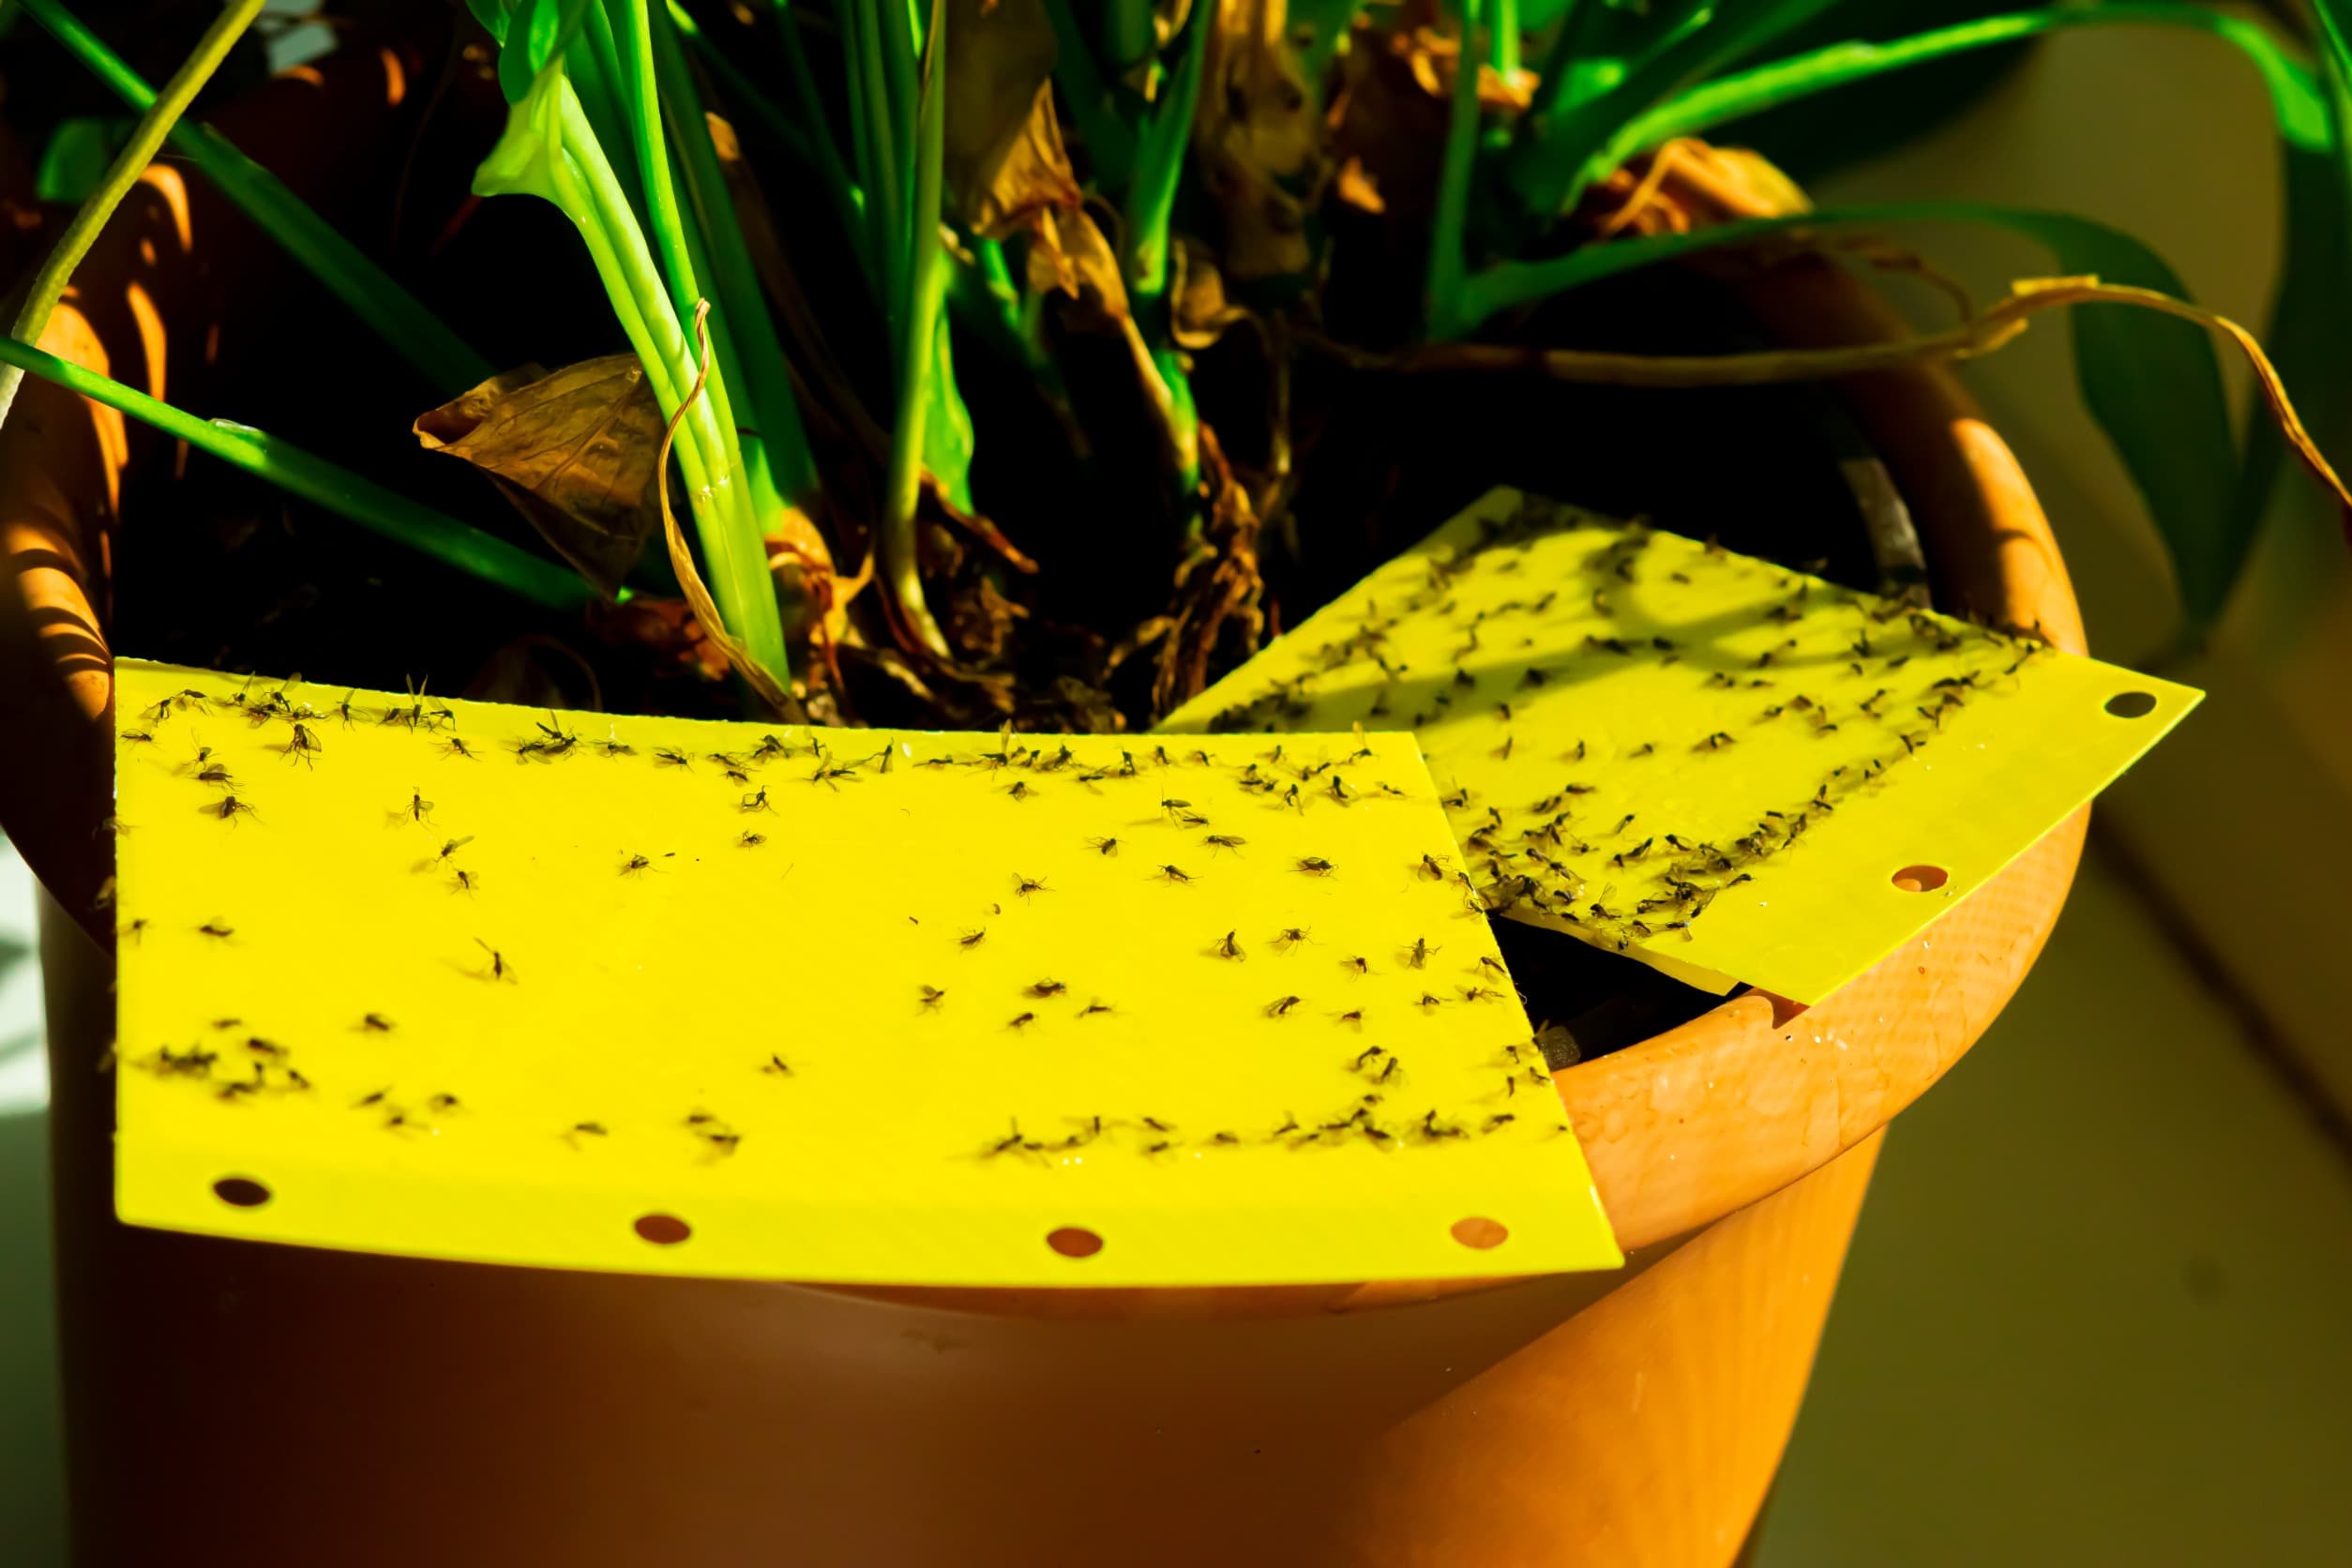 How to Use Home Remedies to Get Rid of Gnats Once & for All